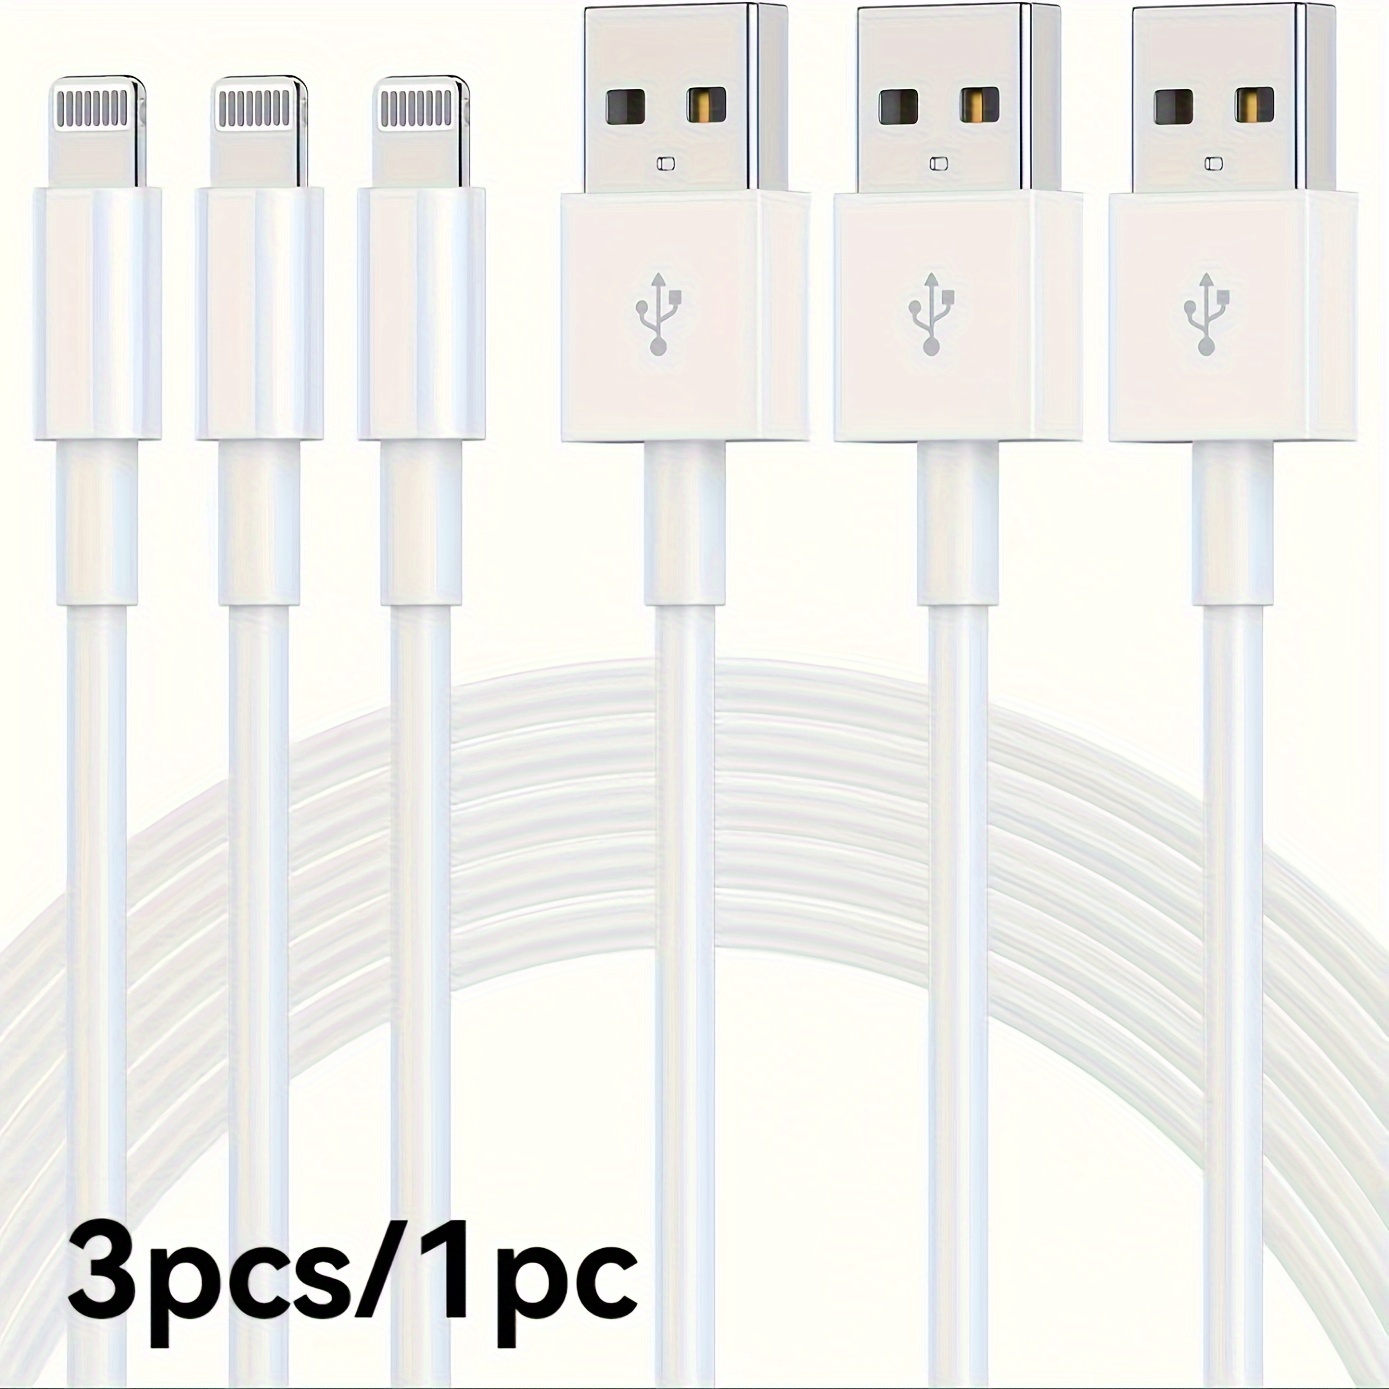 

3pcs/1pc For , Fast Charging Cable, Mfi Certified Usb A Charging Cable, For 13 12 11 Mini Pro Xr Xs Max X Se 8 7 6 Plus Ipad Ipod Airpods - White